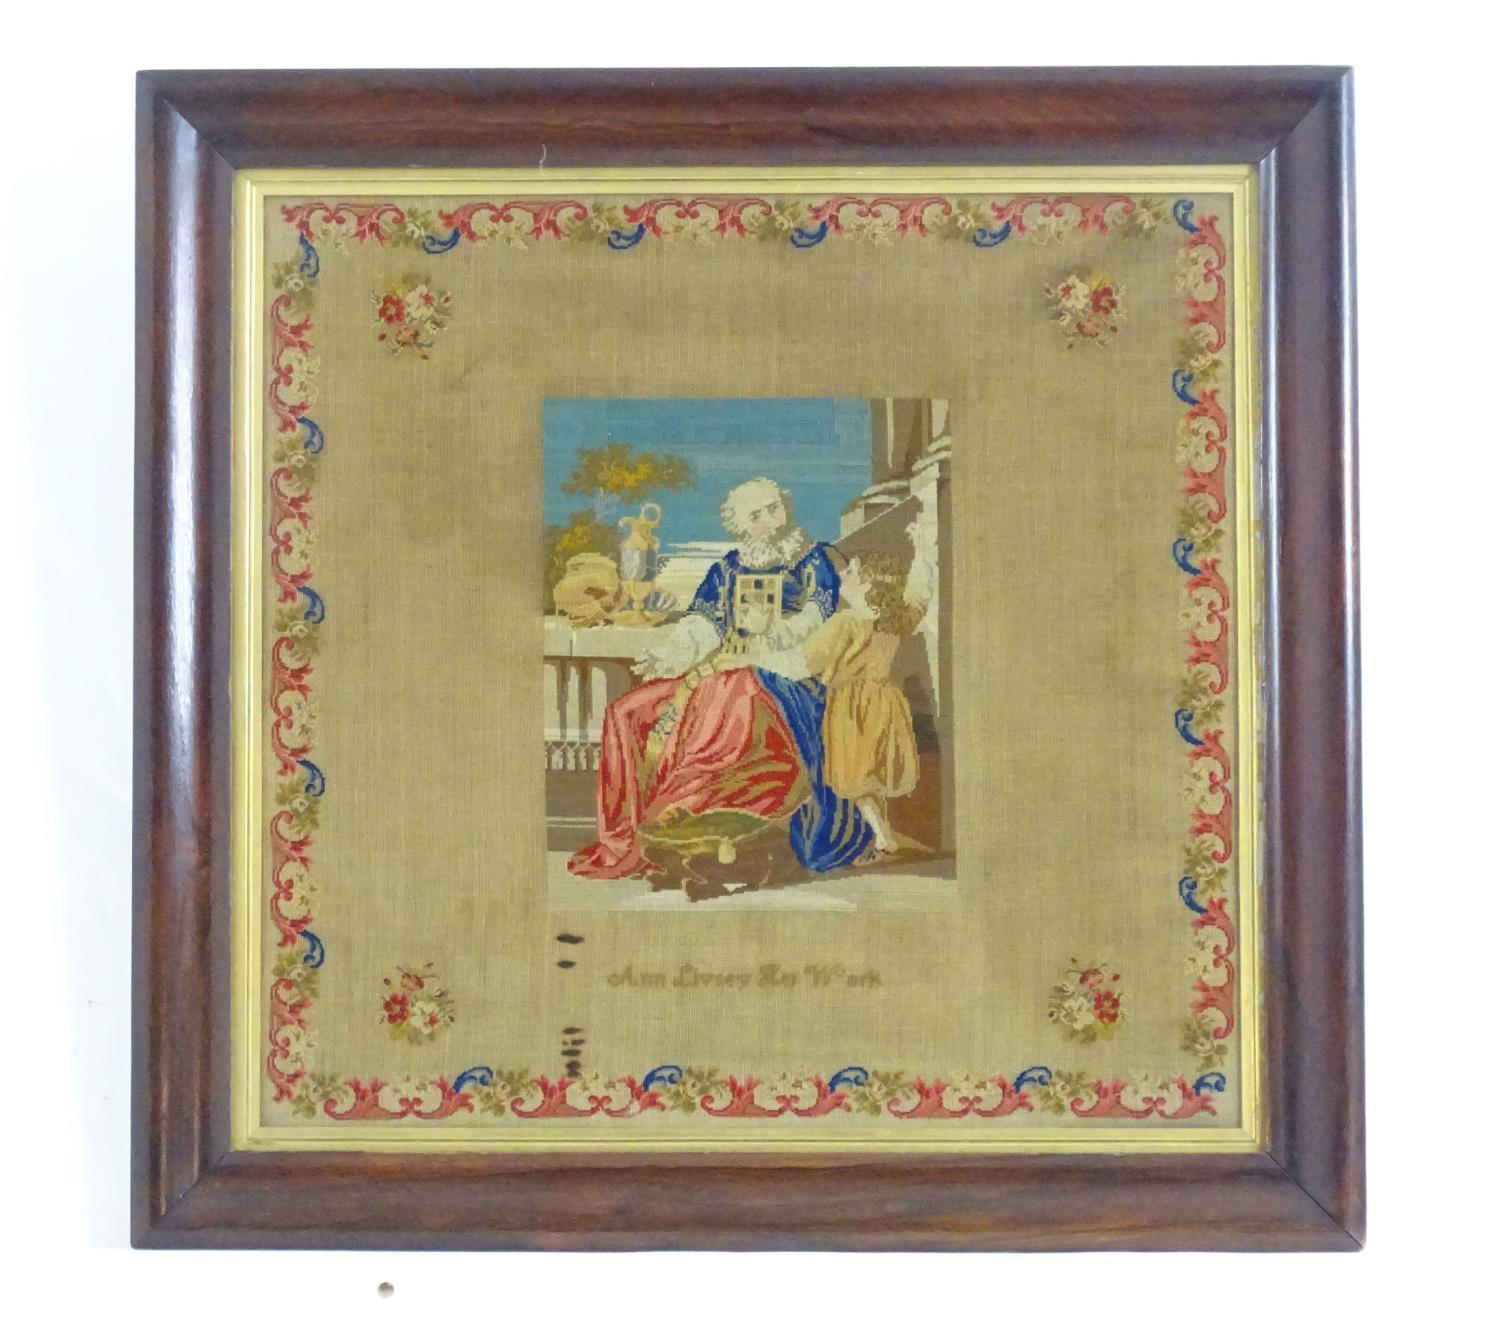 An early 20thC needlework / embroidery / tapestry sampler depicting a philosopher and student in a